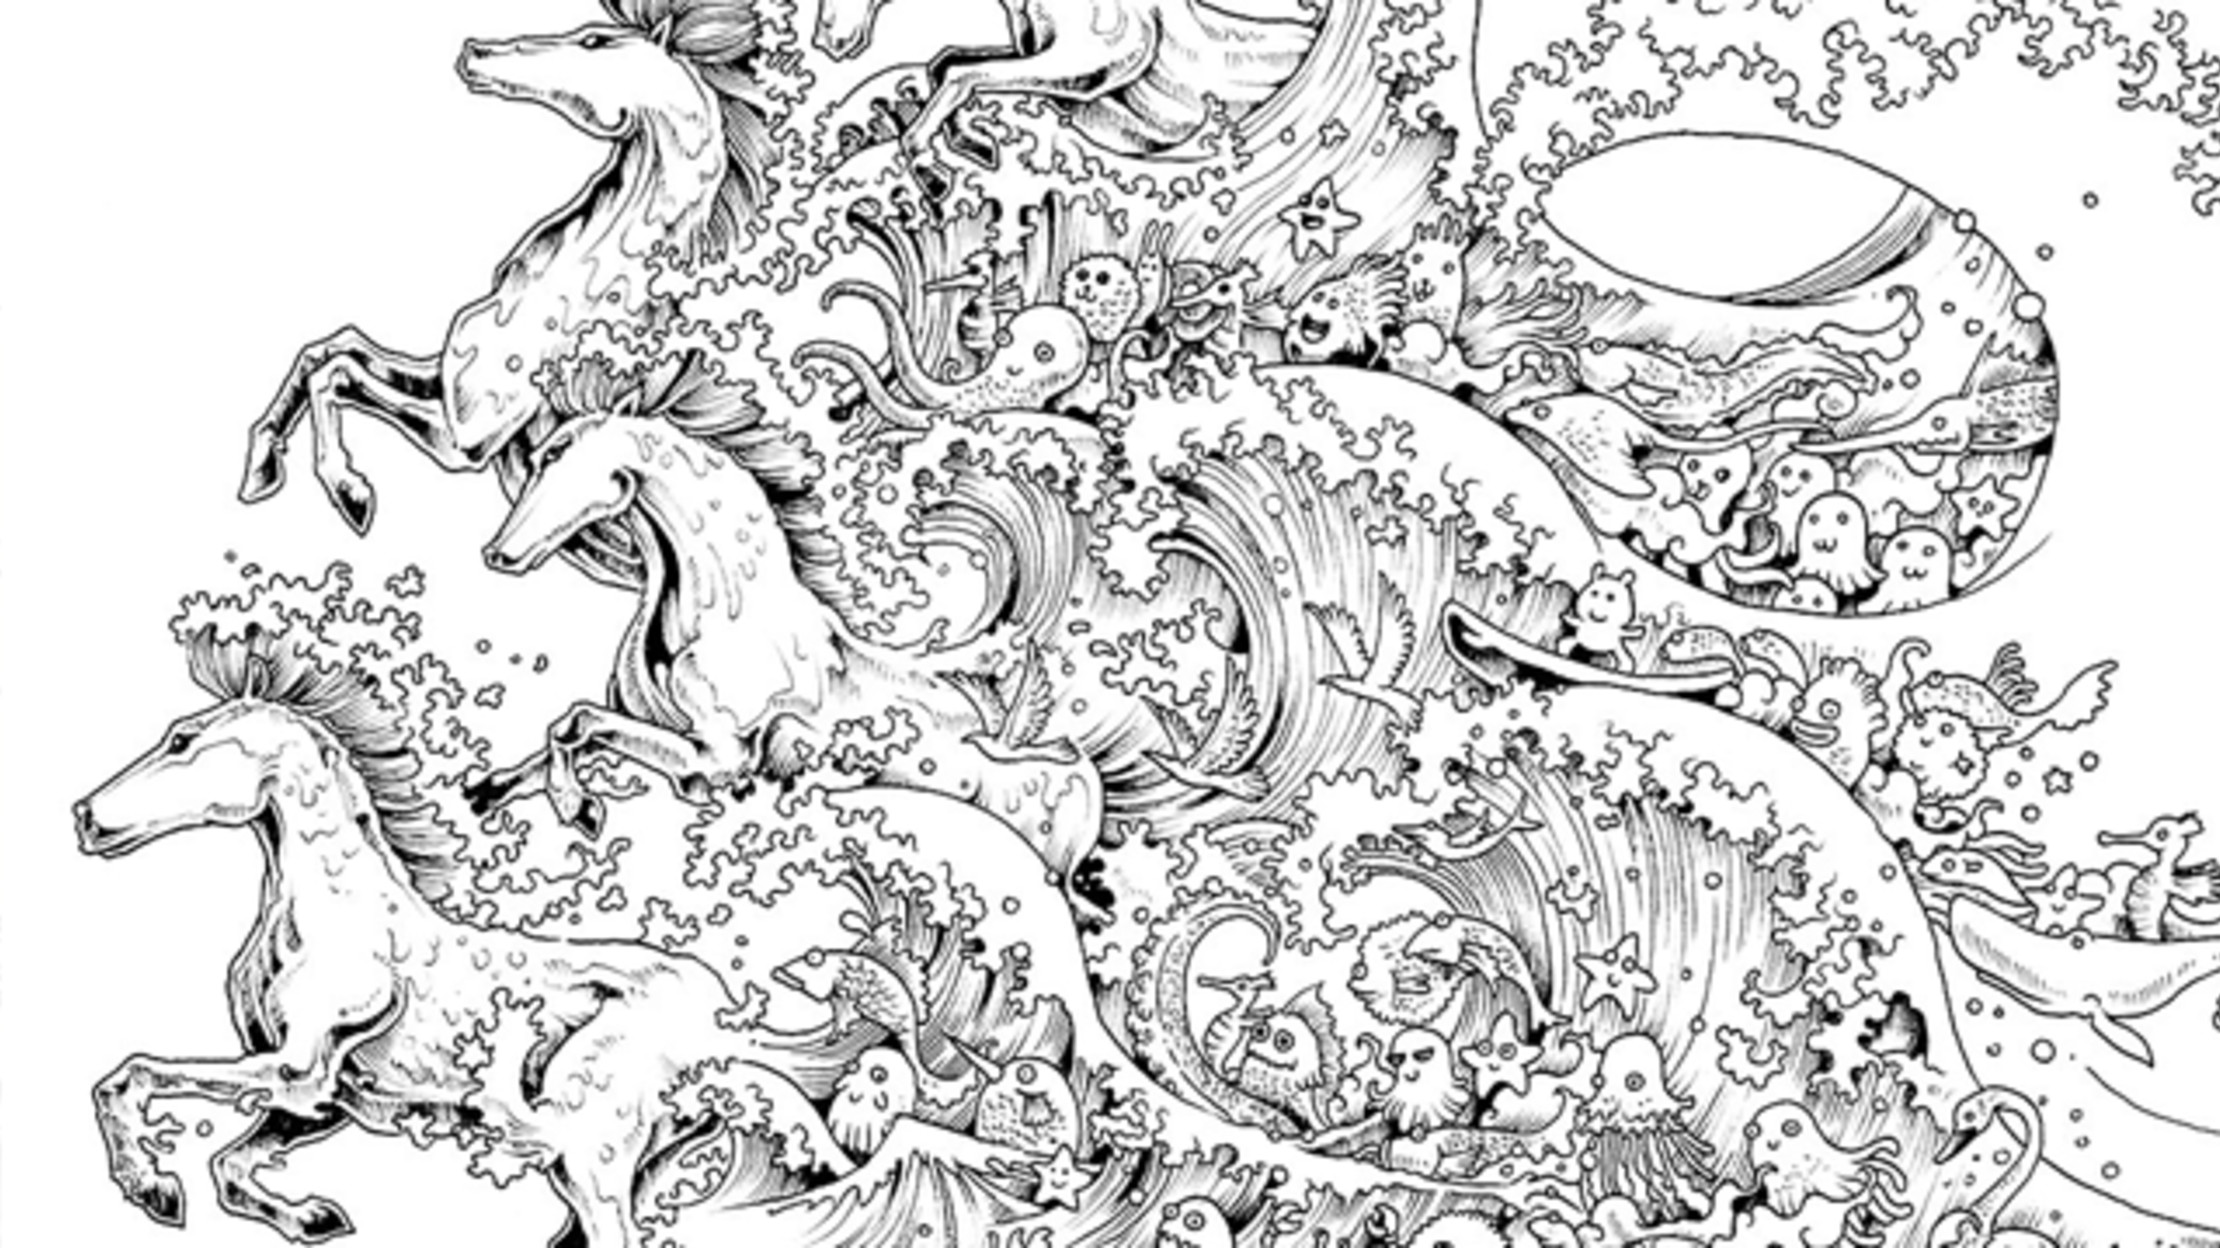 Adult Coloring Book Pictures
 10 Intricate Adult Coloring Books to Help You De Stress